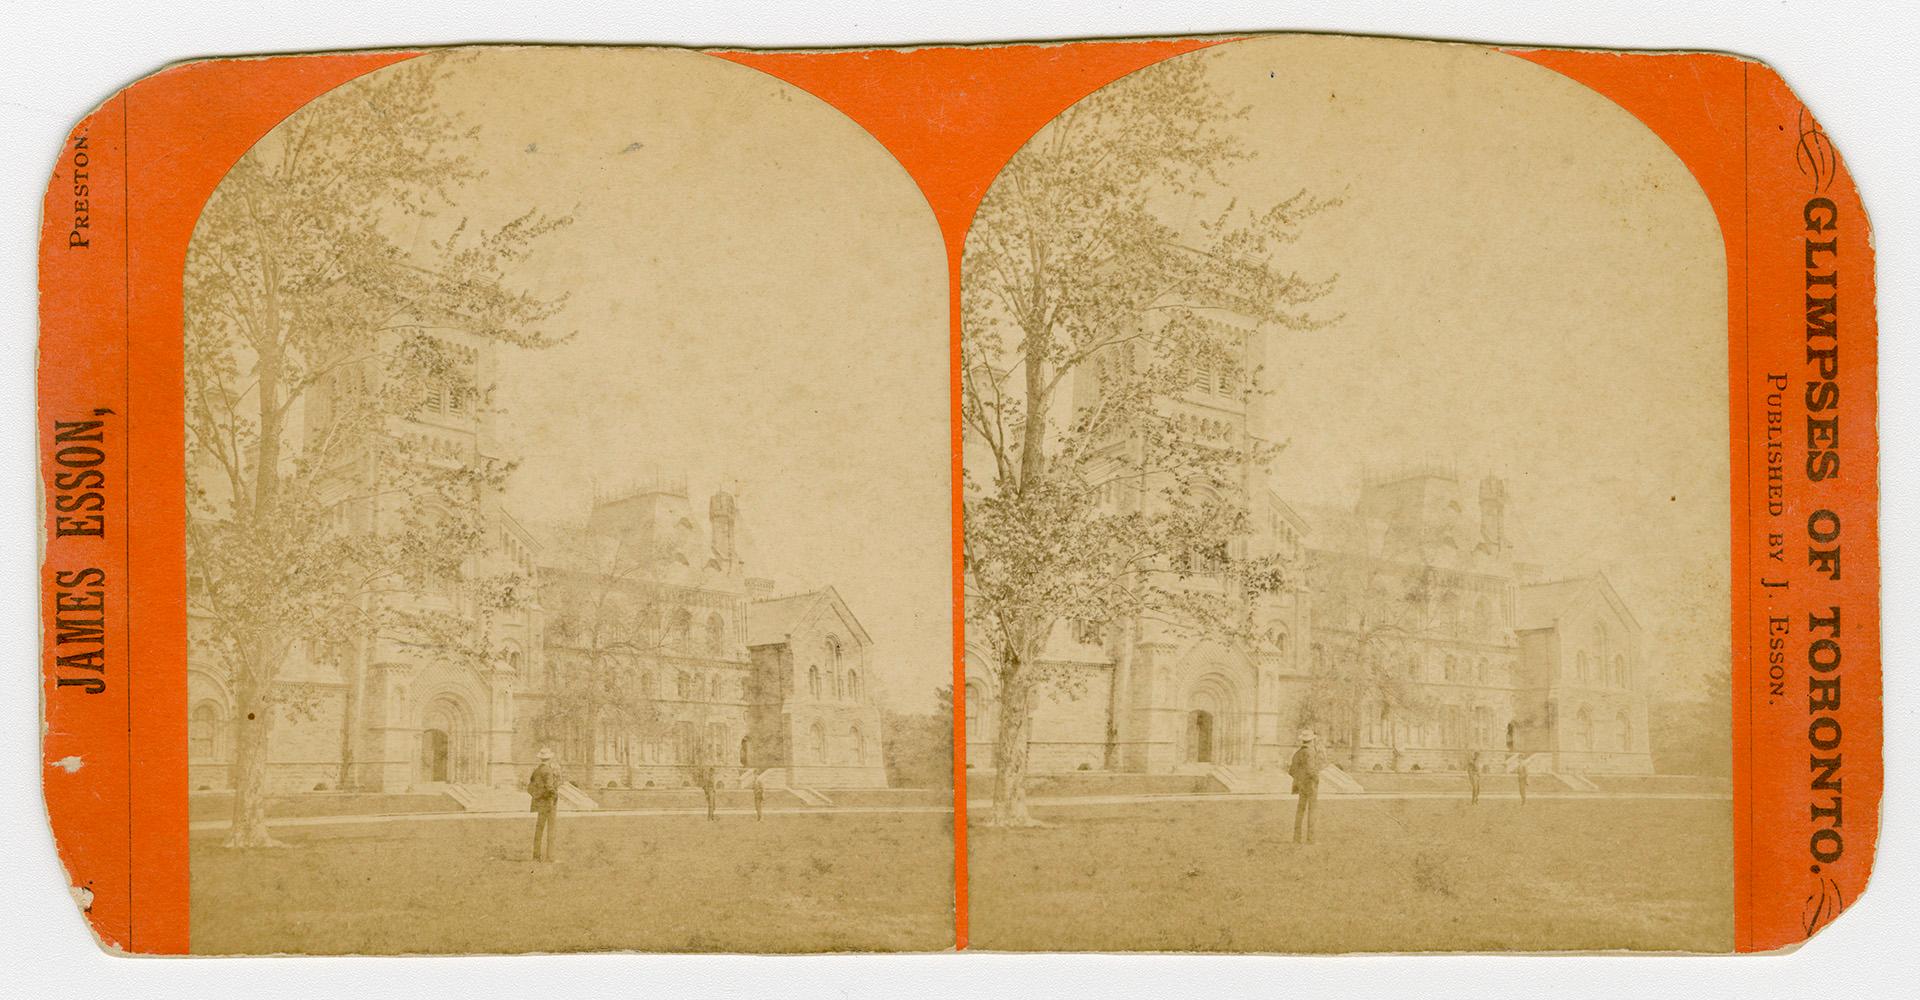 Pictures show three people standing on the lawn in front of a huge collegiate-gothic complex.